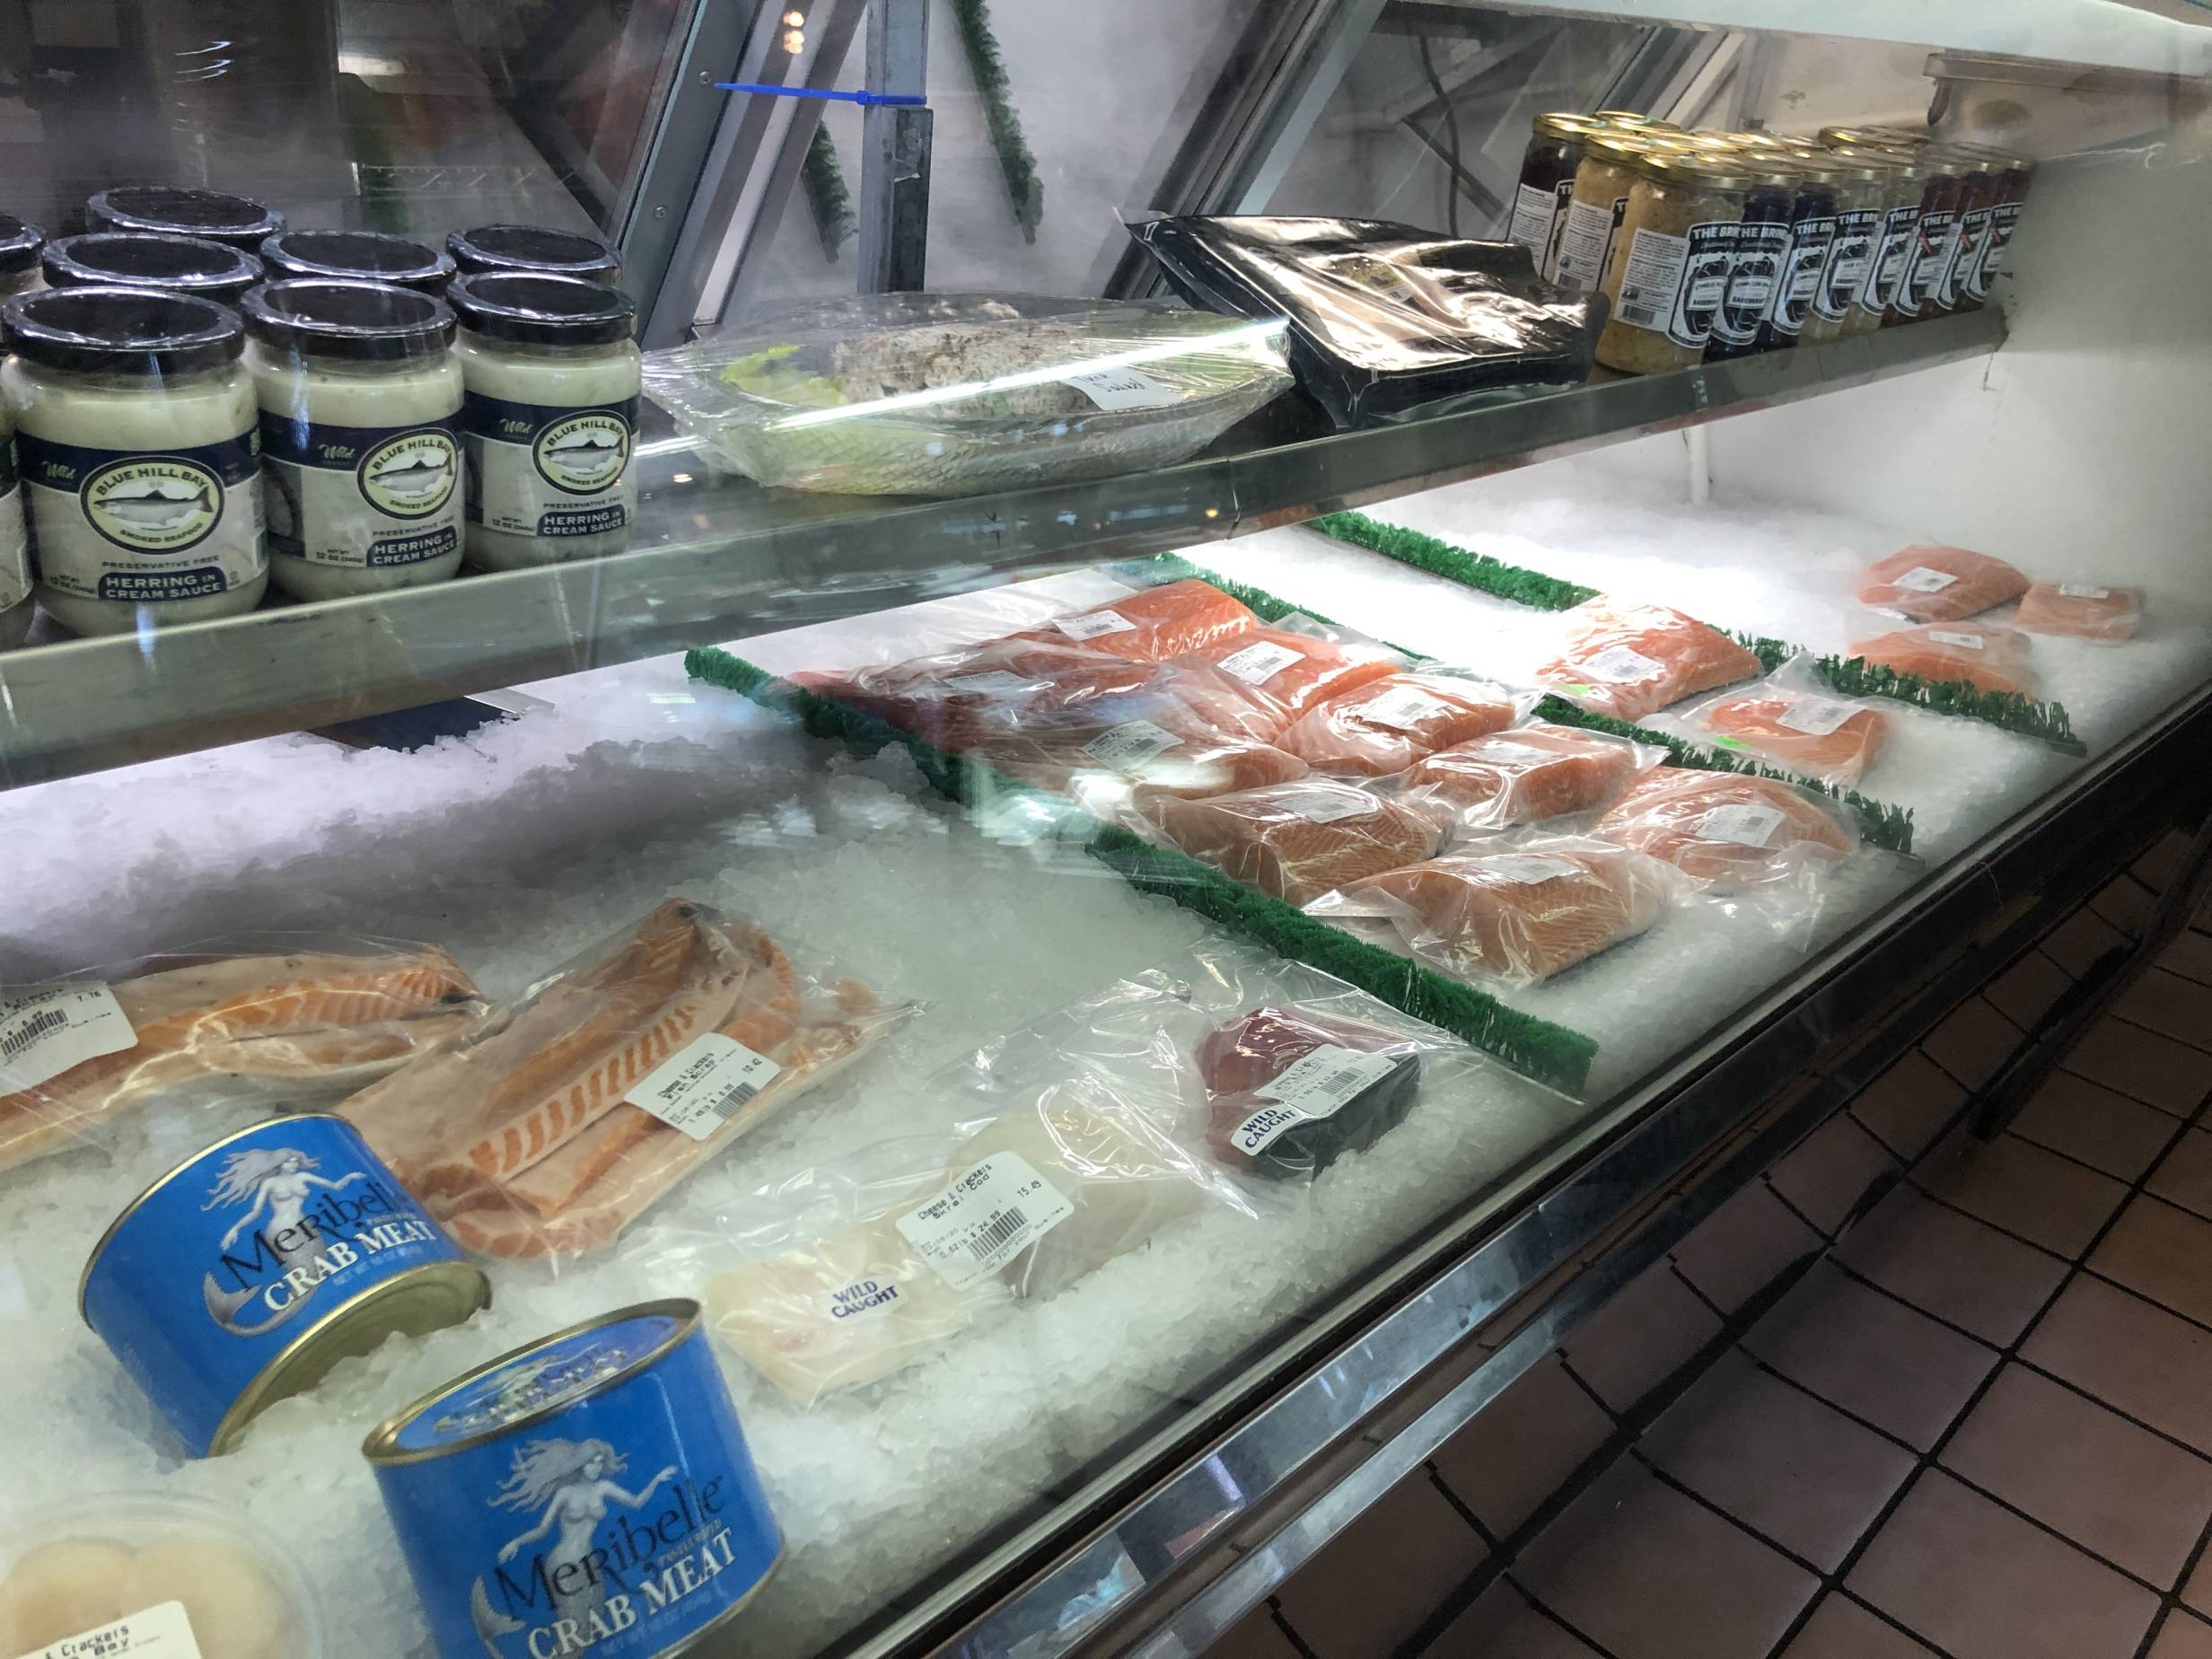 You need to order some fresh fish from Cheese and Crackers